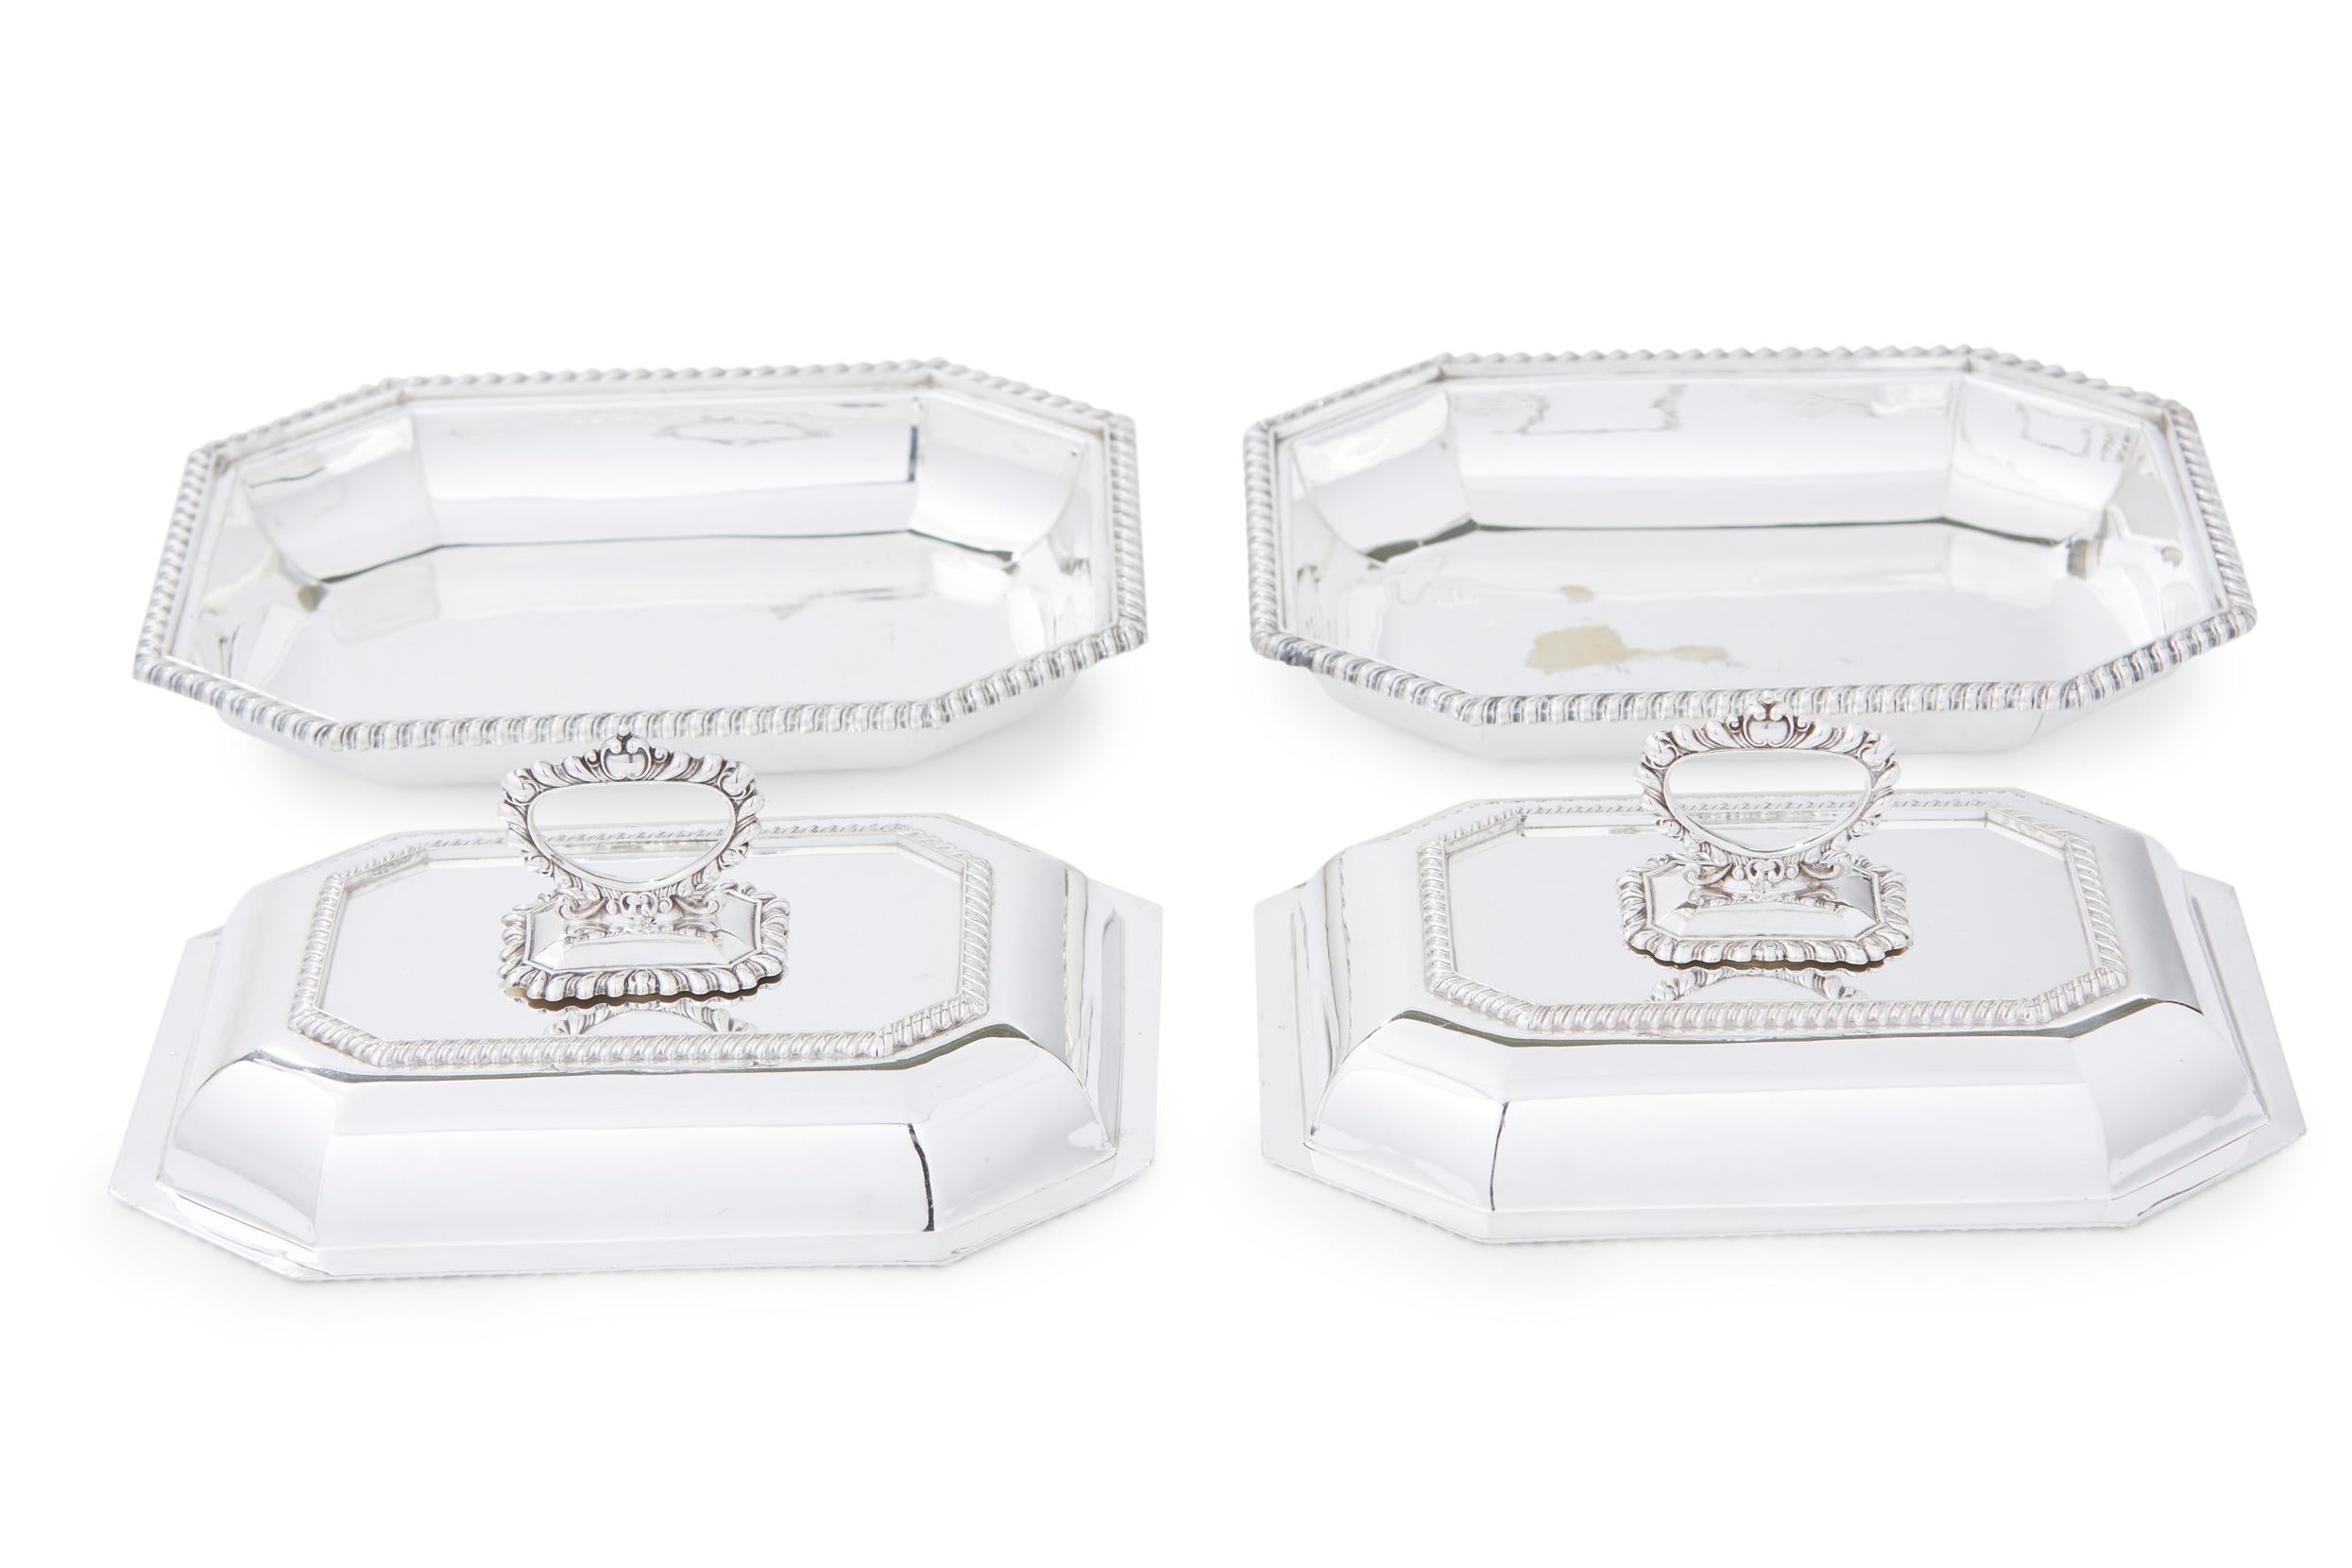 English silver plate pair of rectangular entrée dishes with detachable top handles and exterior cast bead borders design detail. The reversible tops can be used as separate open dishes. Great condition with minor wear. Maker's mark undersigned &